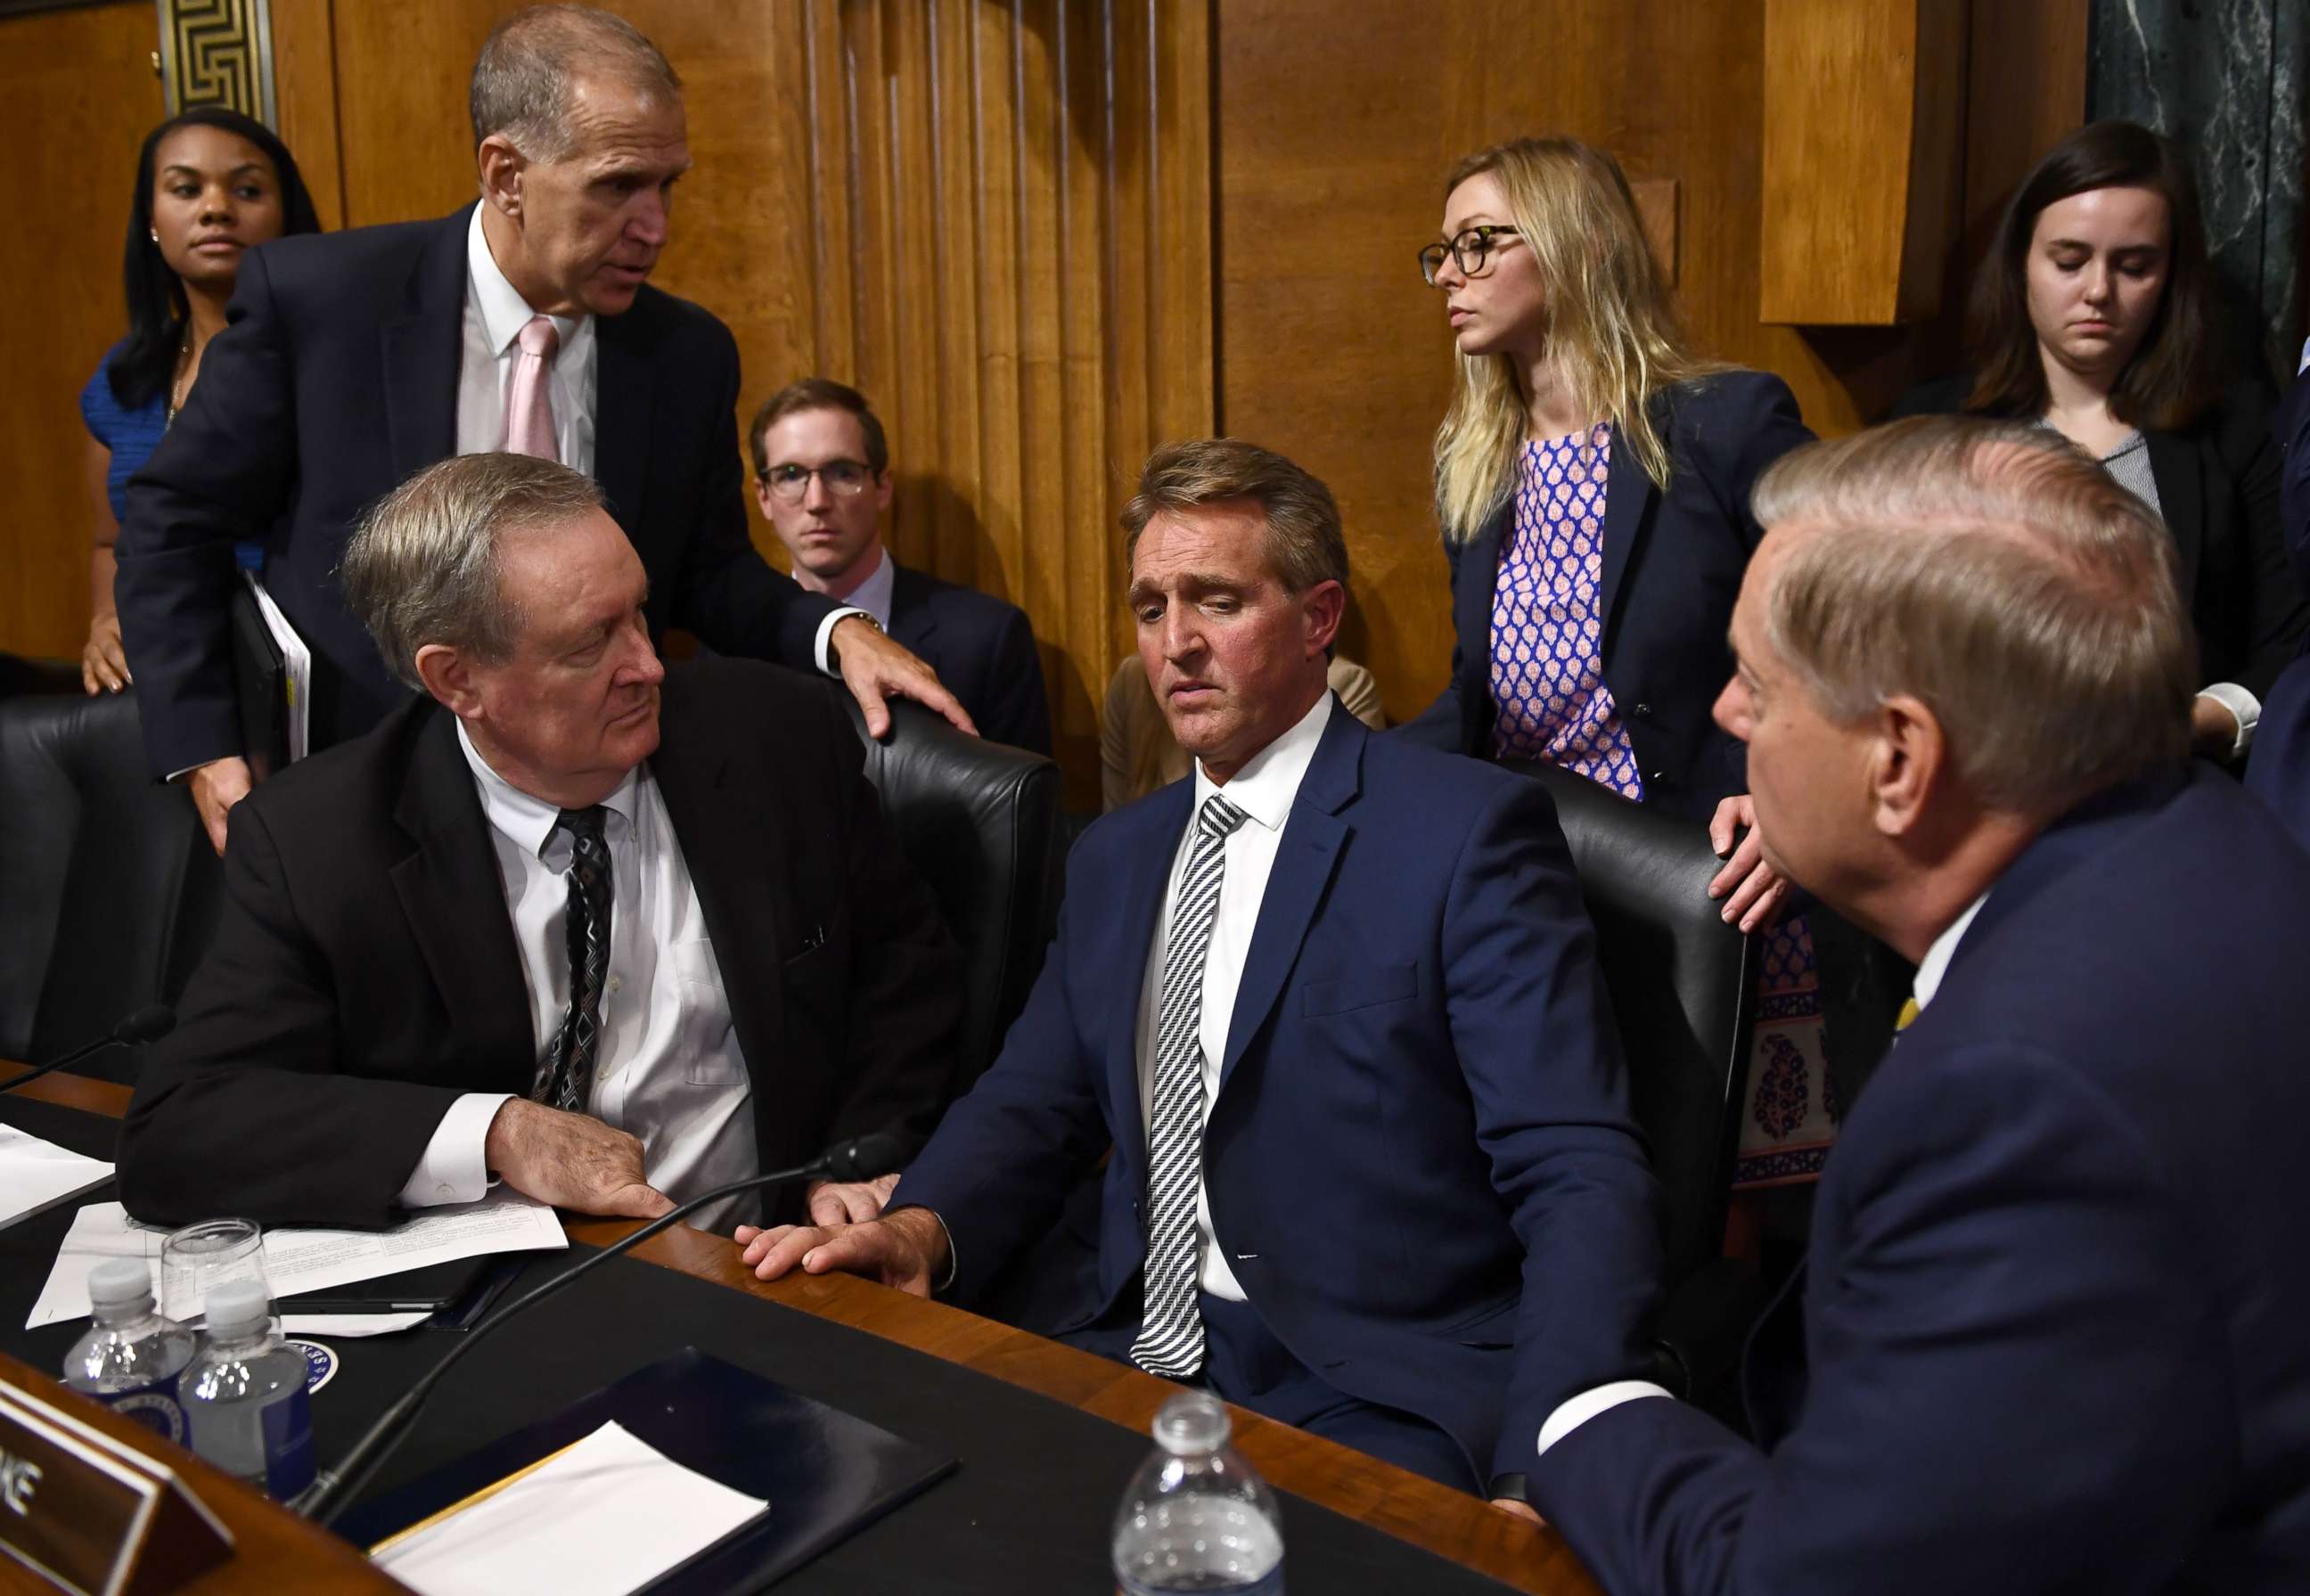 Senate Judiciary Committee member Sen. Jeff Flake speaks with committee colleagues during a hearing in Washington on Sept. 28, 2018, after requested a delay for a floor vote to allow for an FBI investigation.